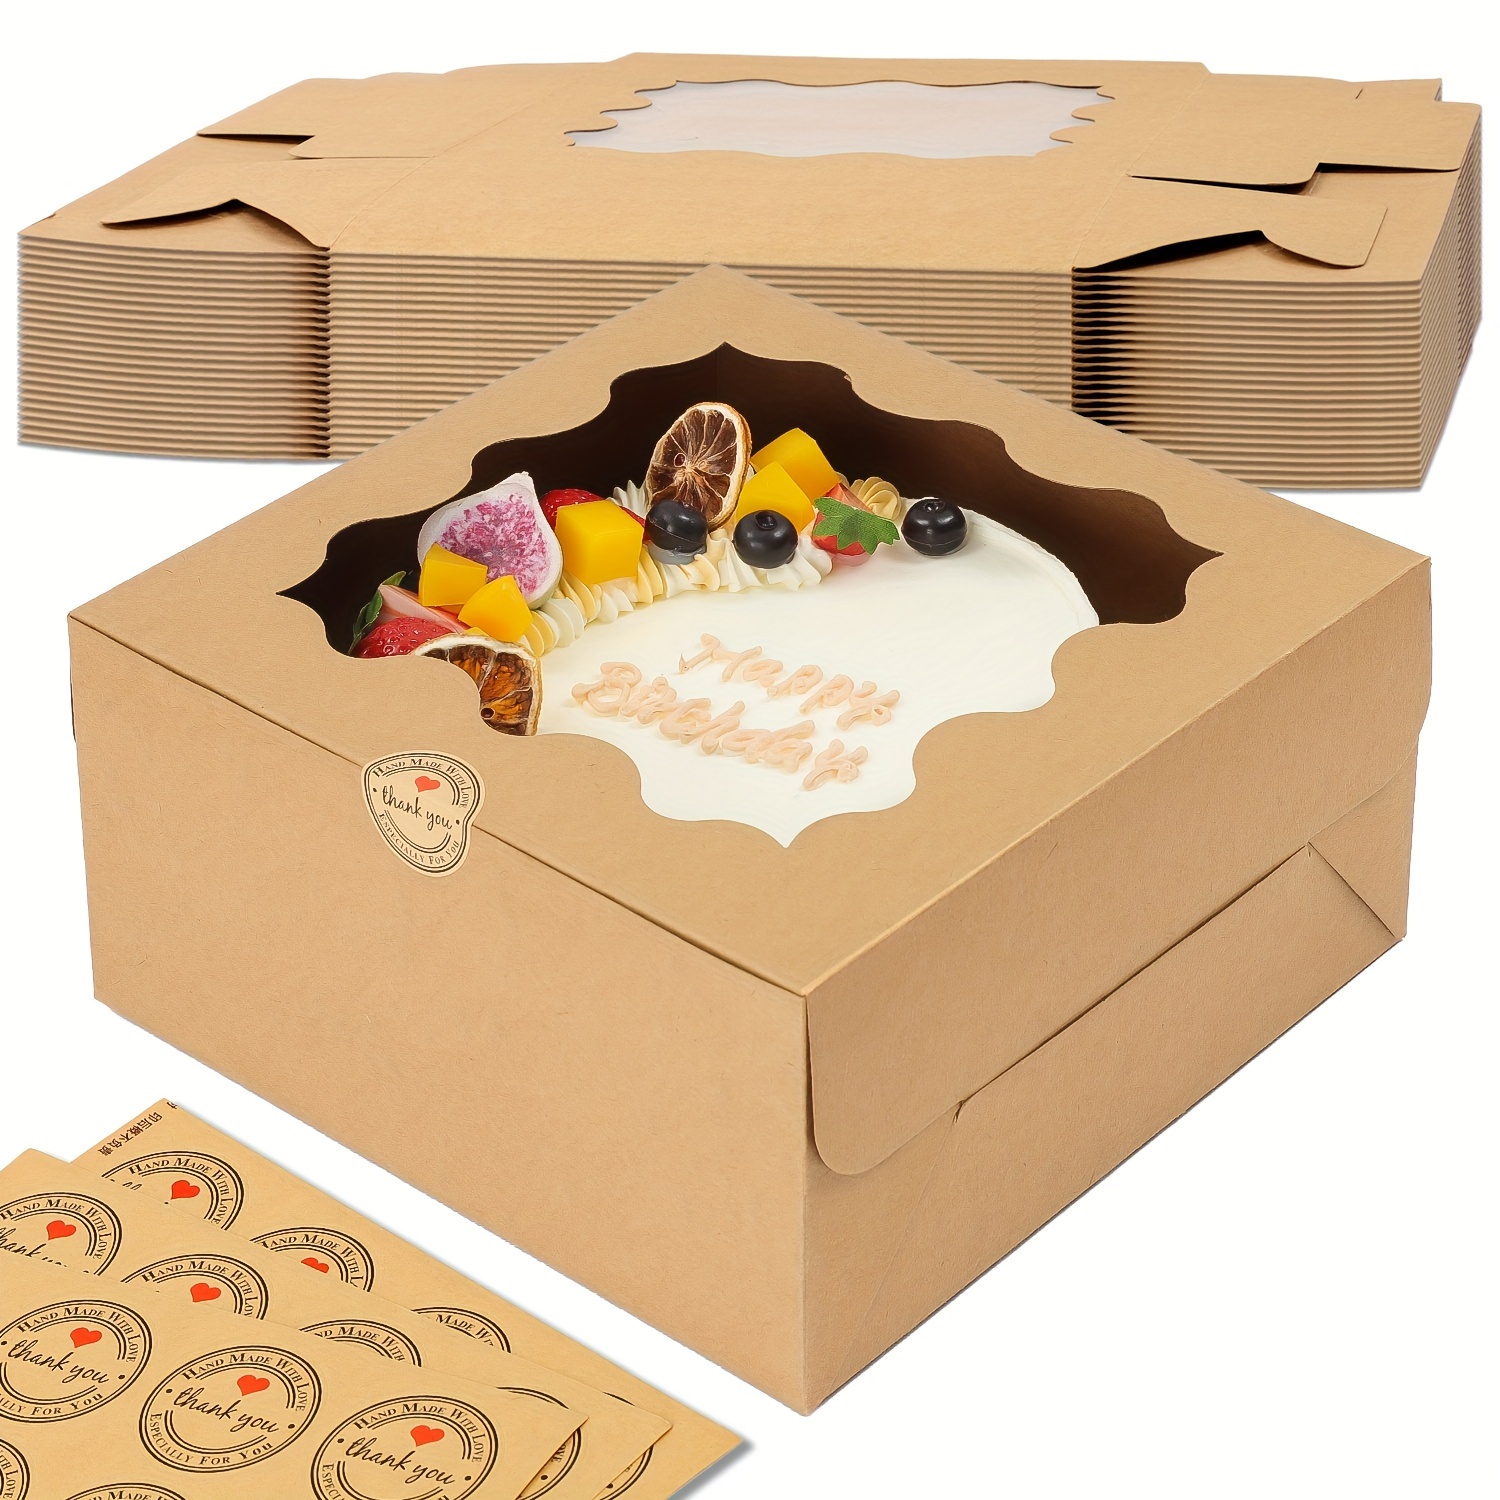 

24pcs Biocorpla 10x10x5 Inches Brown Cake Boxes With Window, Bakery Boxes With Window, Pastry Boxes, Dessert Boxes, Cookie Boxes For Gift Giving, Cake, Pastries, Pie, Chocolates, Cupcakes,